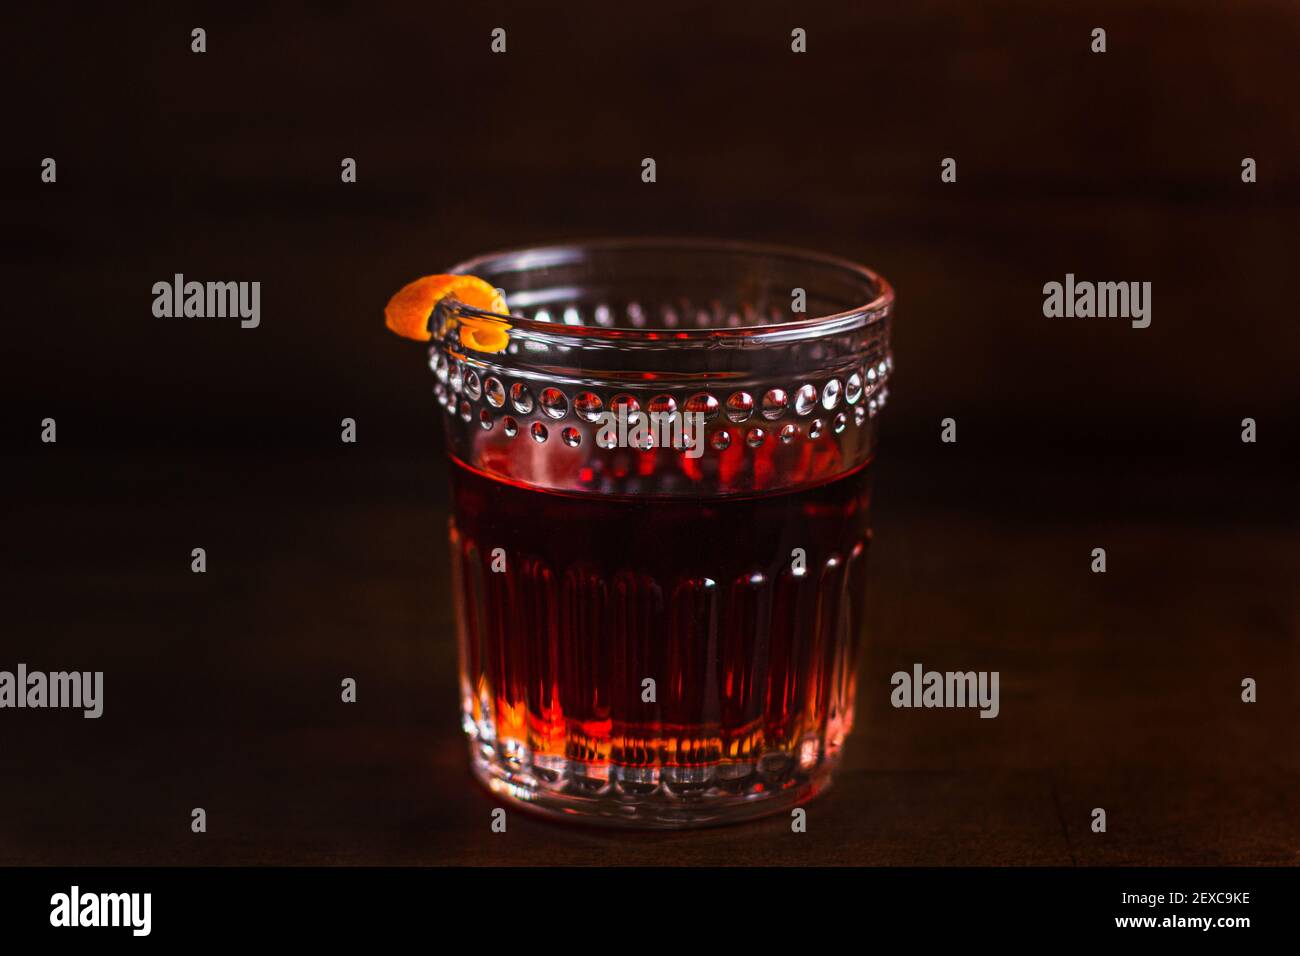 A Sazerac, a classic spirit-forward cocktail, sitting on a rustic wooden surface. Stock Photo